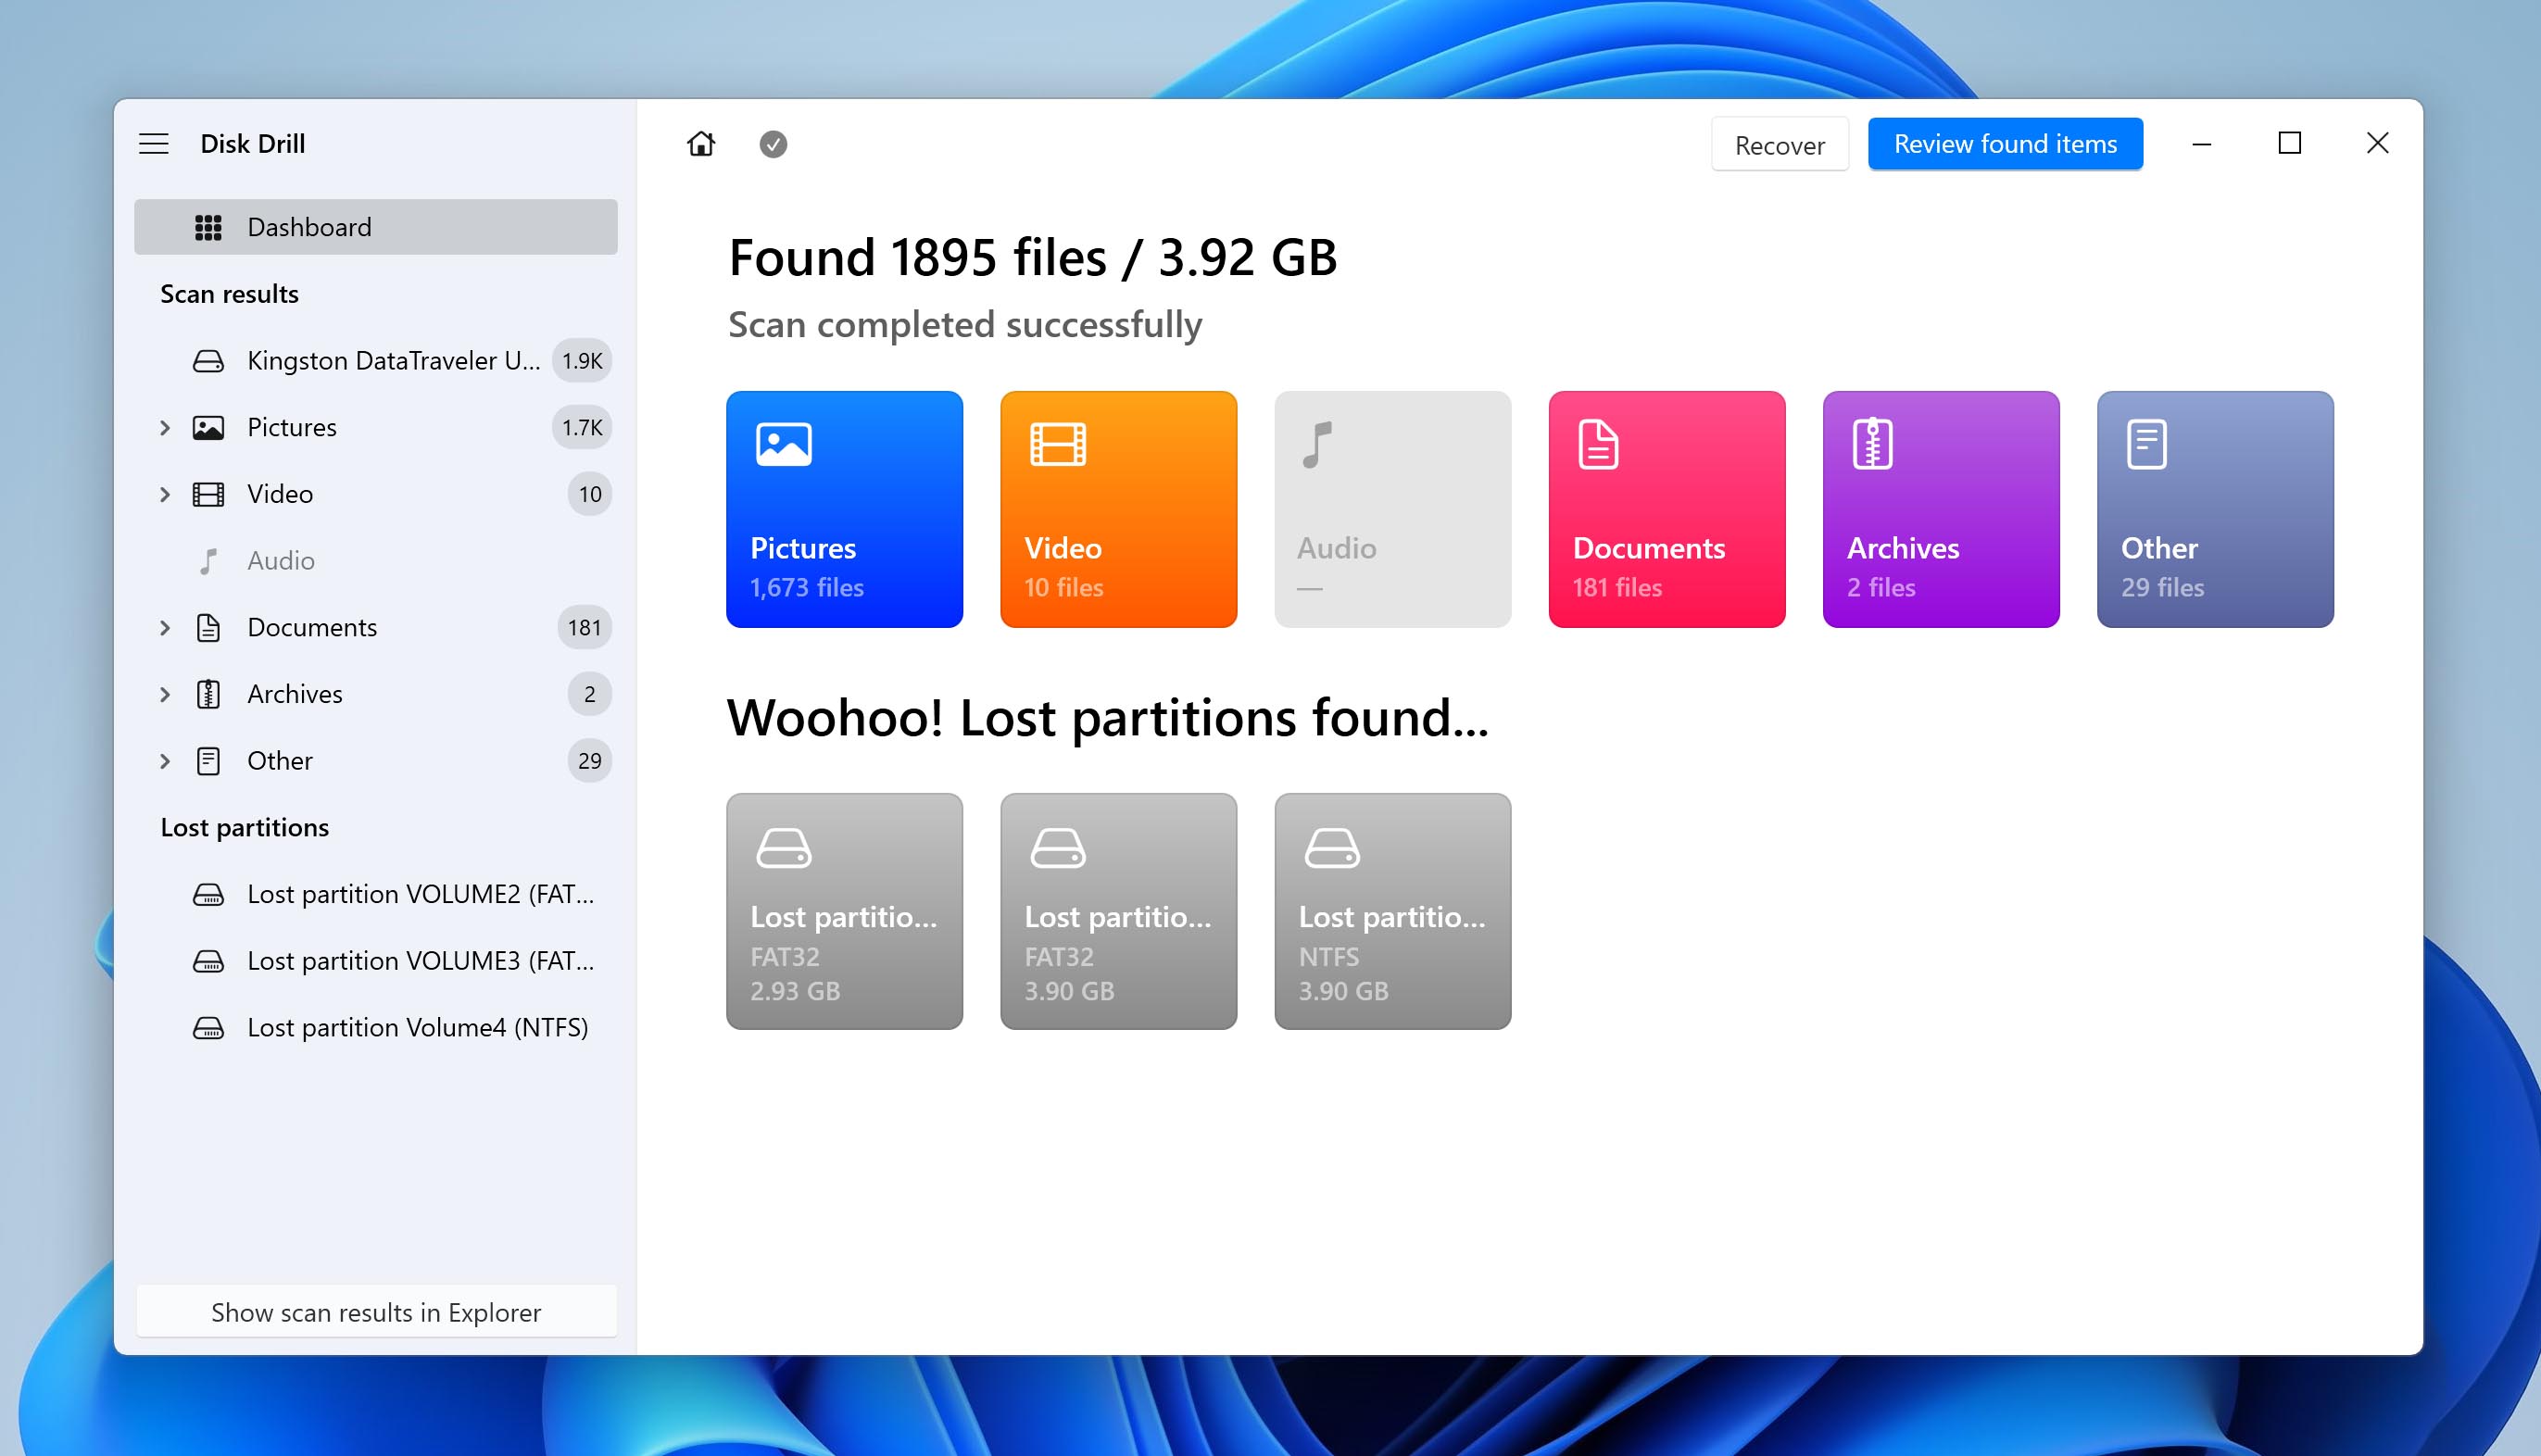 Visual guide to starting a scan on your flash drive to locate lost files